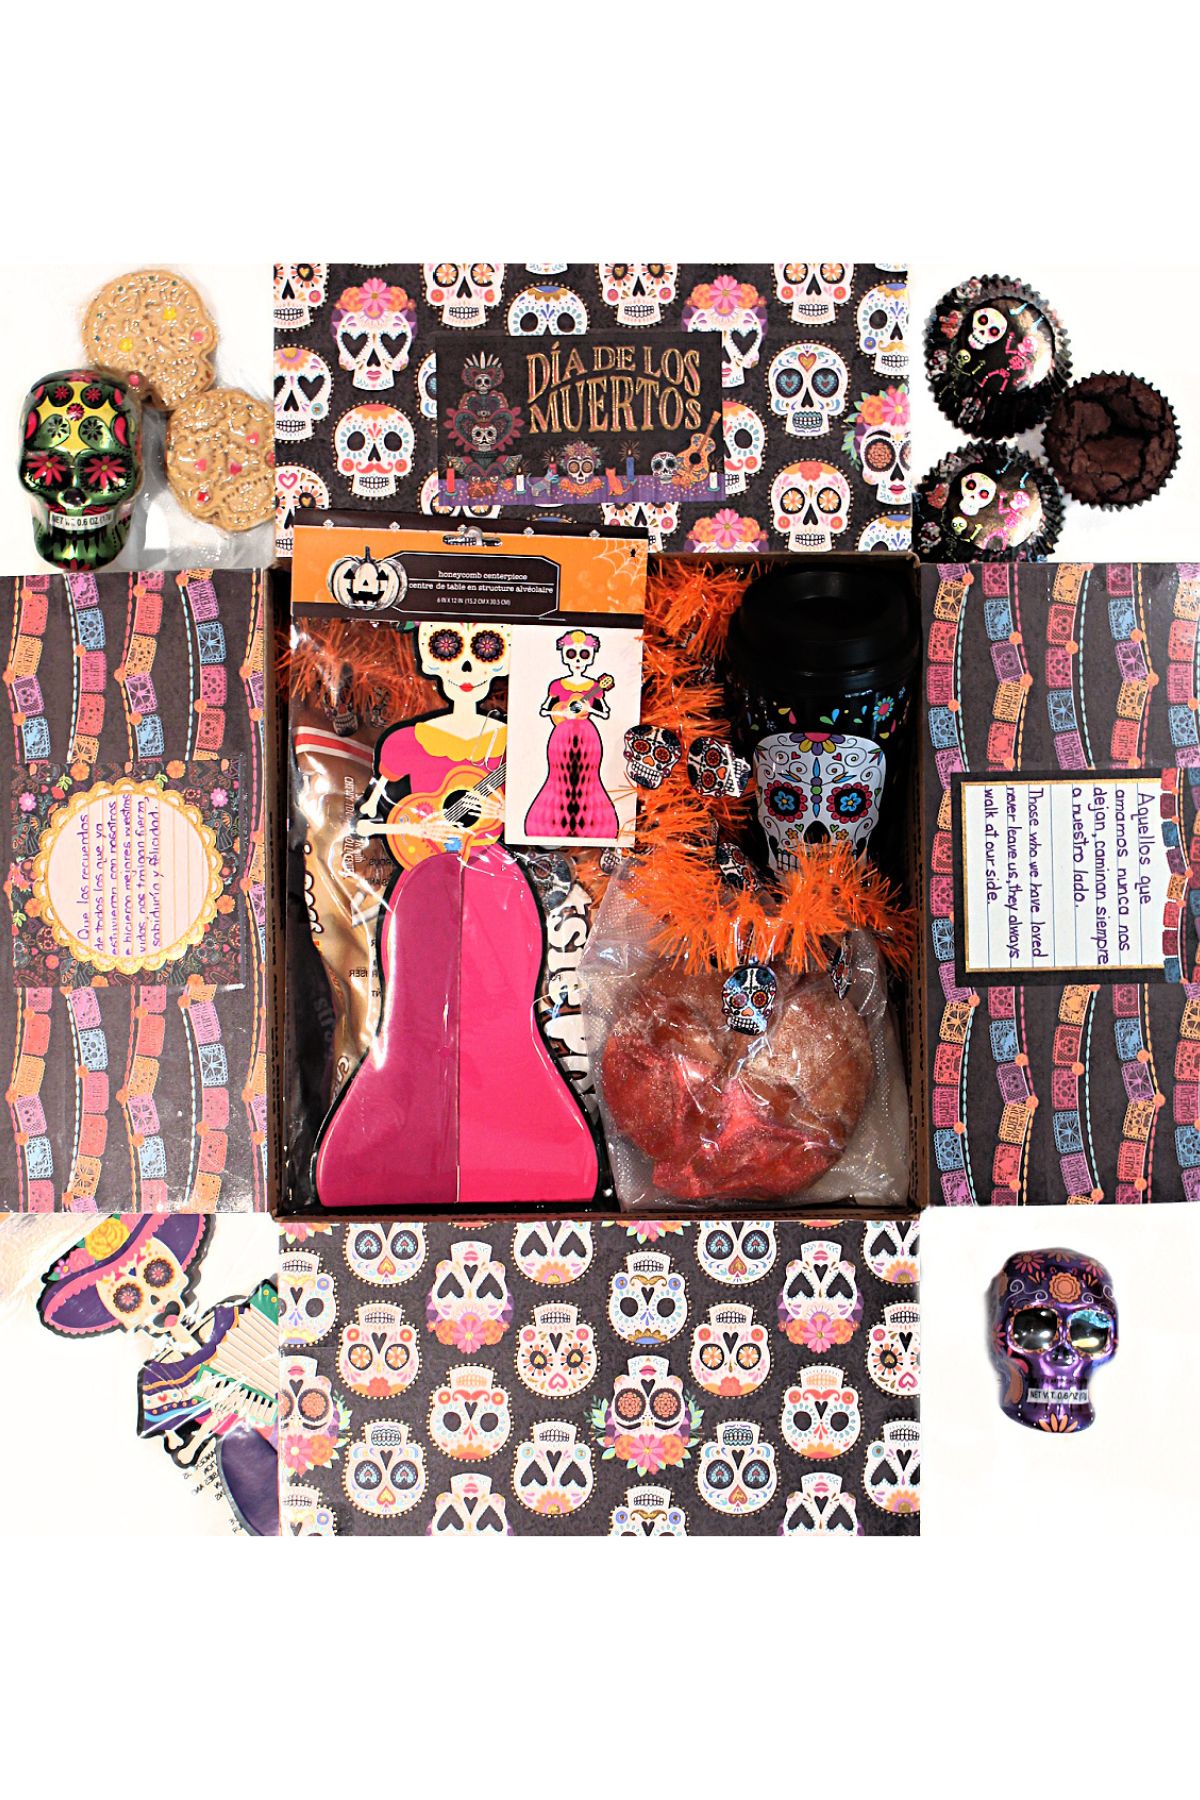 Dia de los Muertos care package with the box flaps decorated and filled with baked good and holiday decorations.